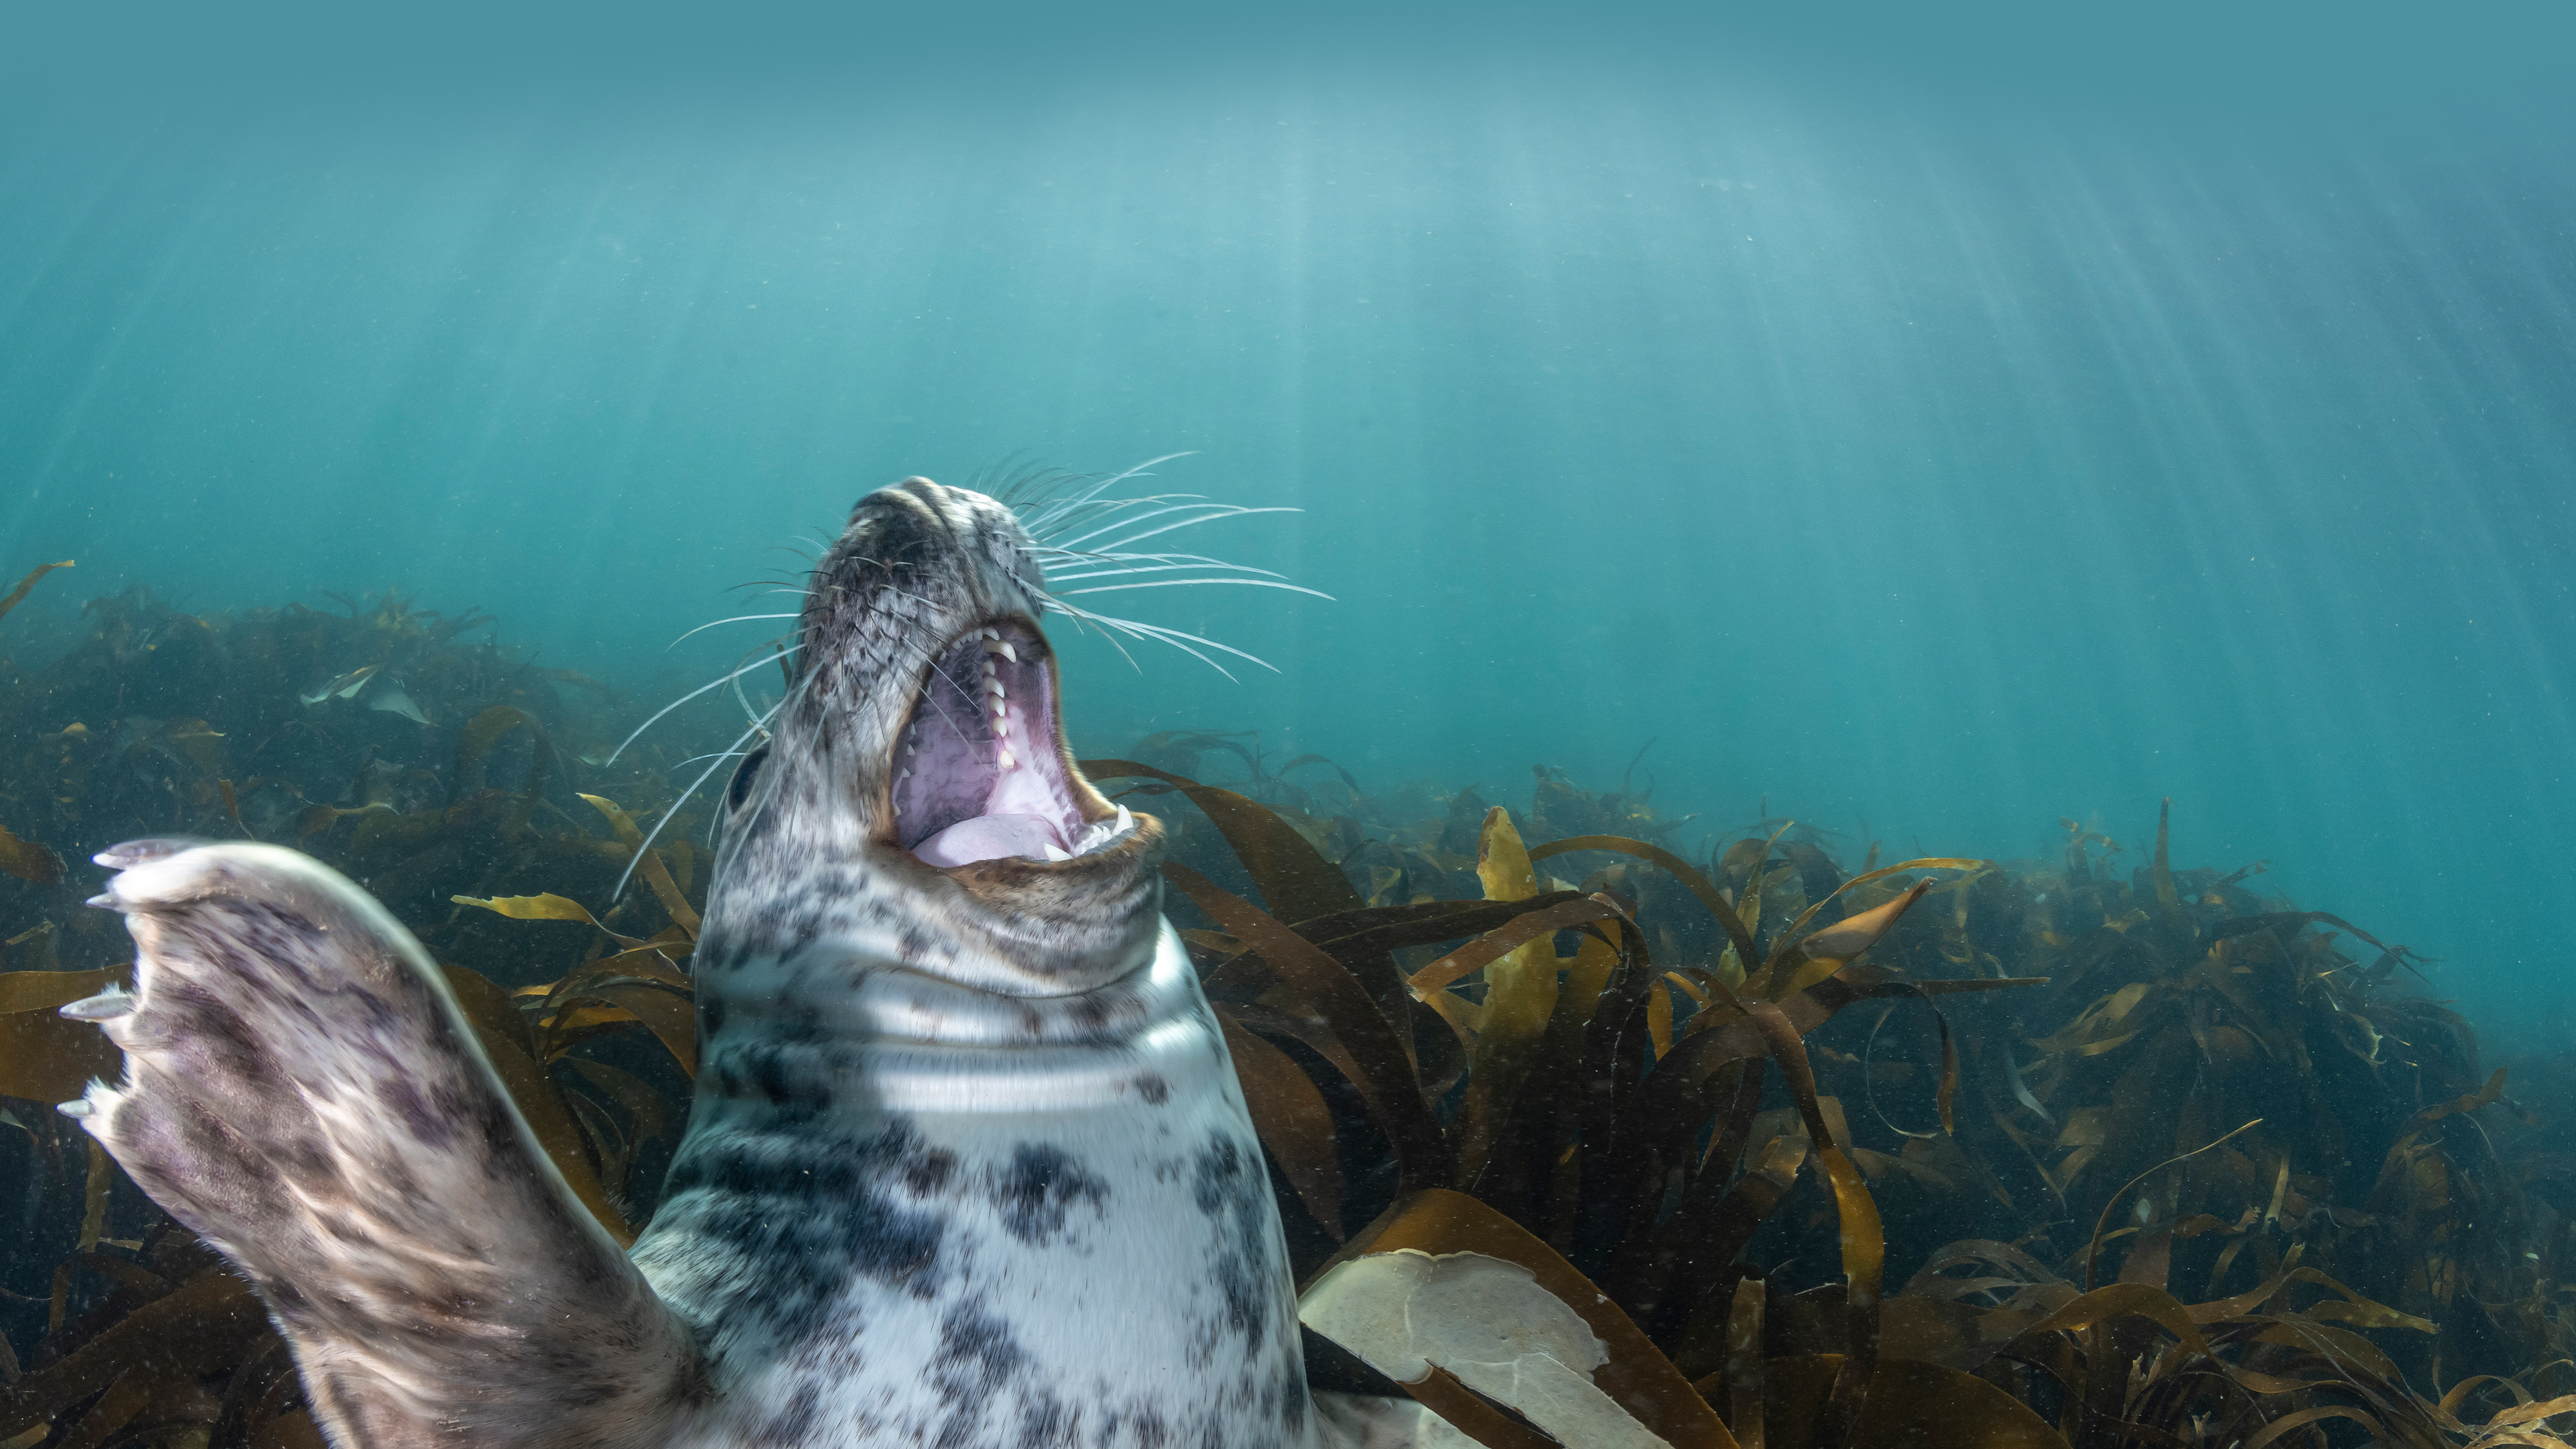 Gray seal pup, Lundy Island, England by Henley Spiers